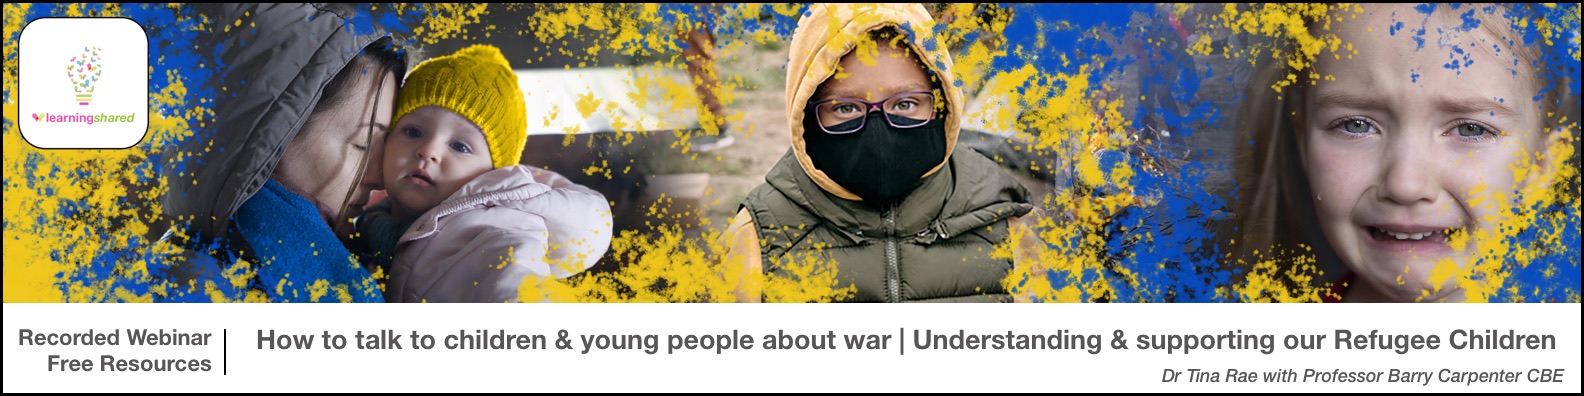 Recorded Webinar and Free Resources. How to talk to children and young people about war and understanding and supporting our refugee children